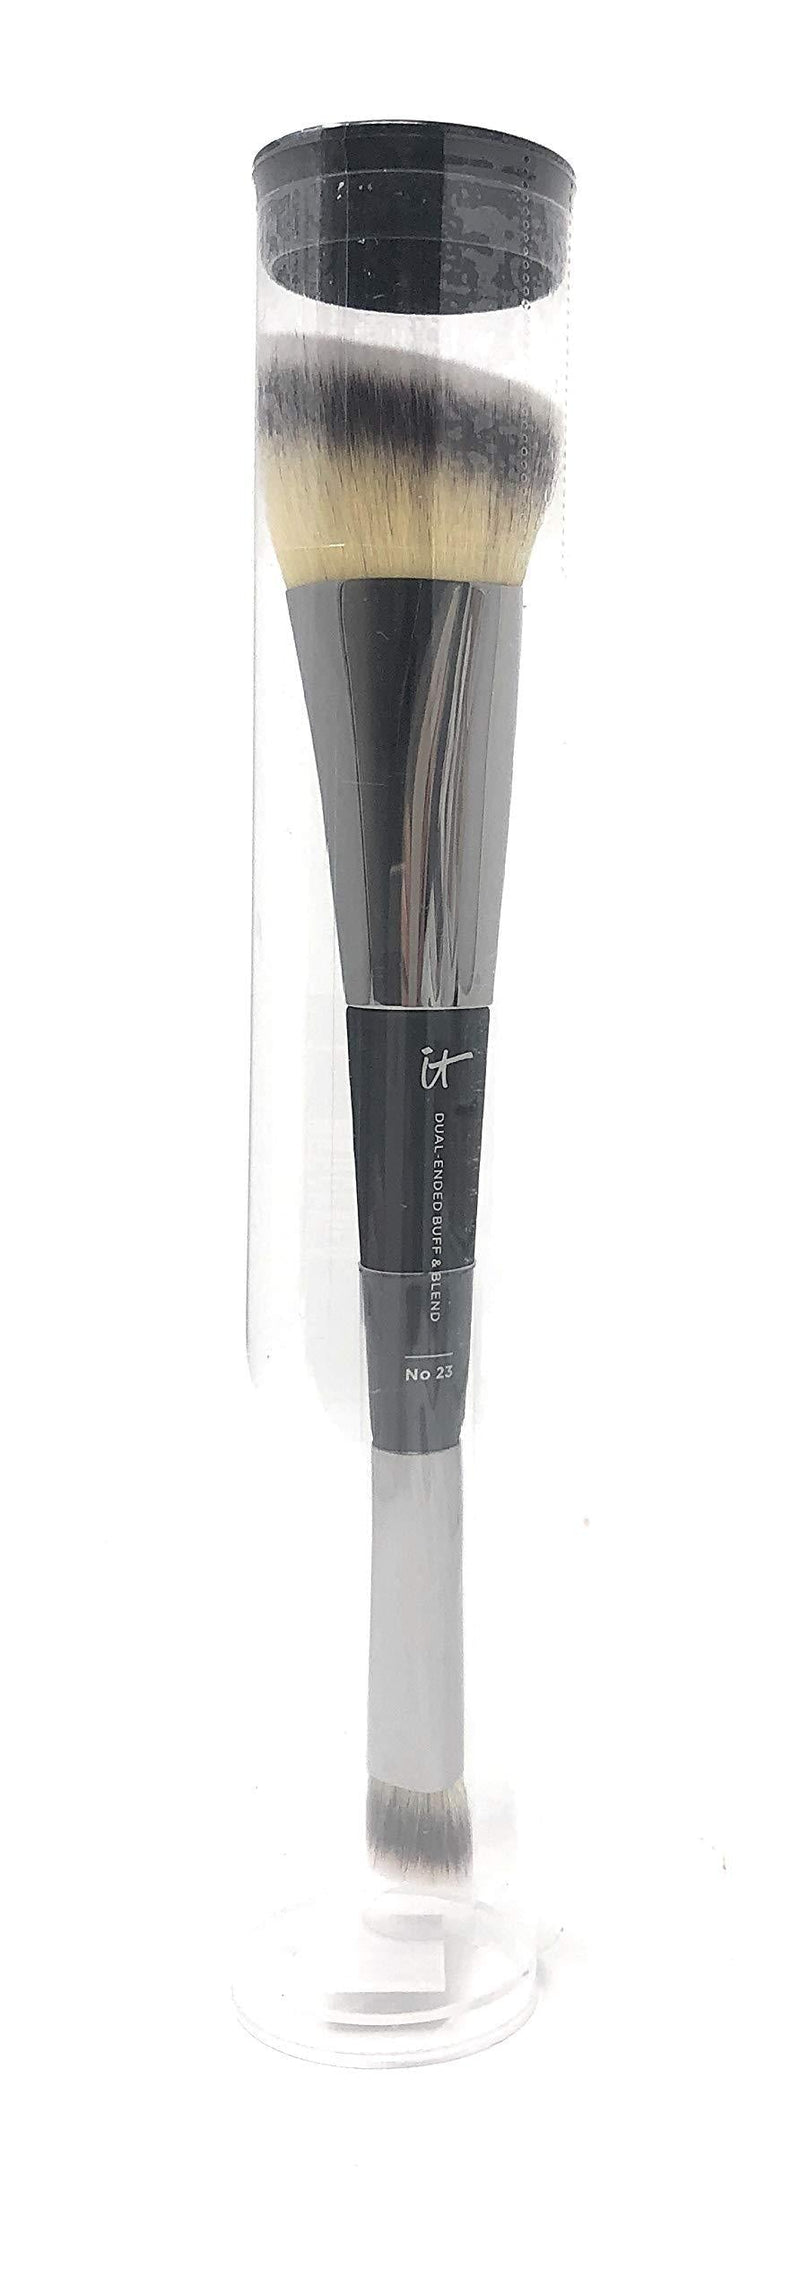 [Australia] - It Cosmetics Heavenly Luxe No 23 Dual Ended Buff & Blend Brush 